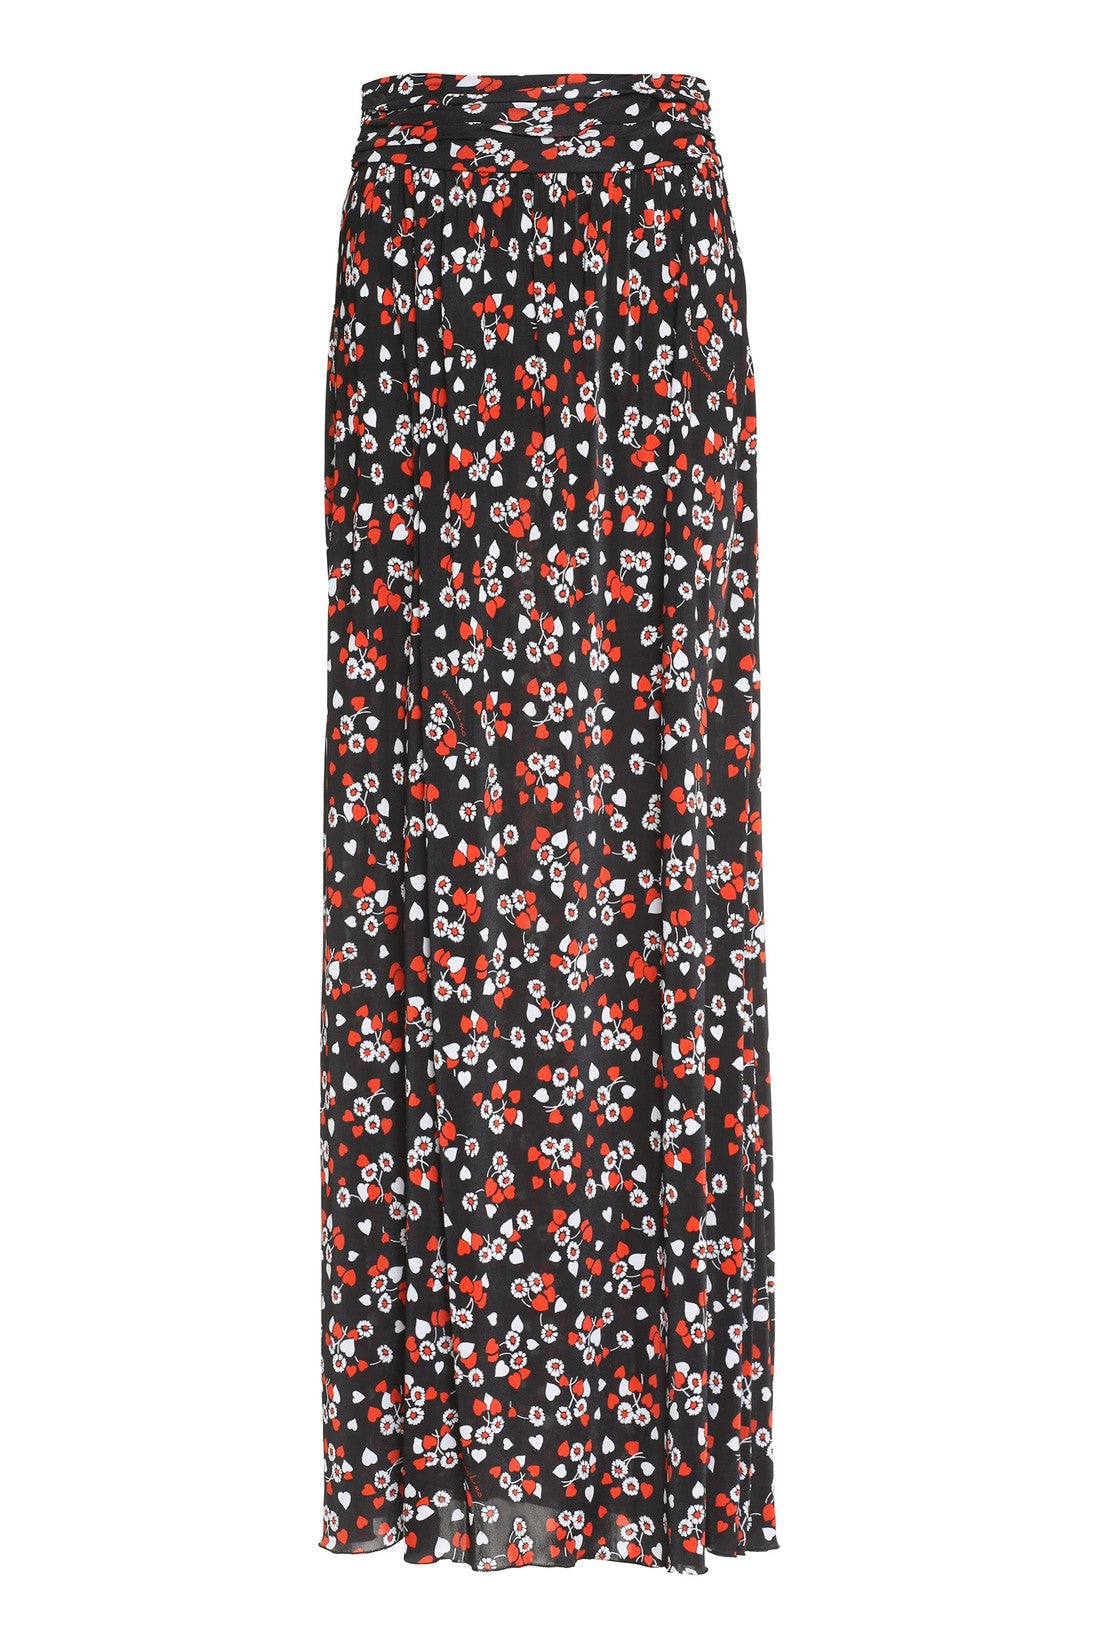 Moschino-OUTLET-SALE-Long skirt-ARCHIVIST